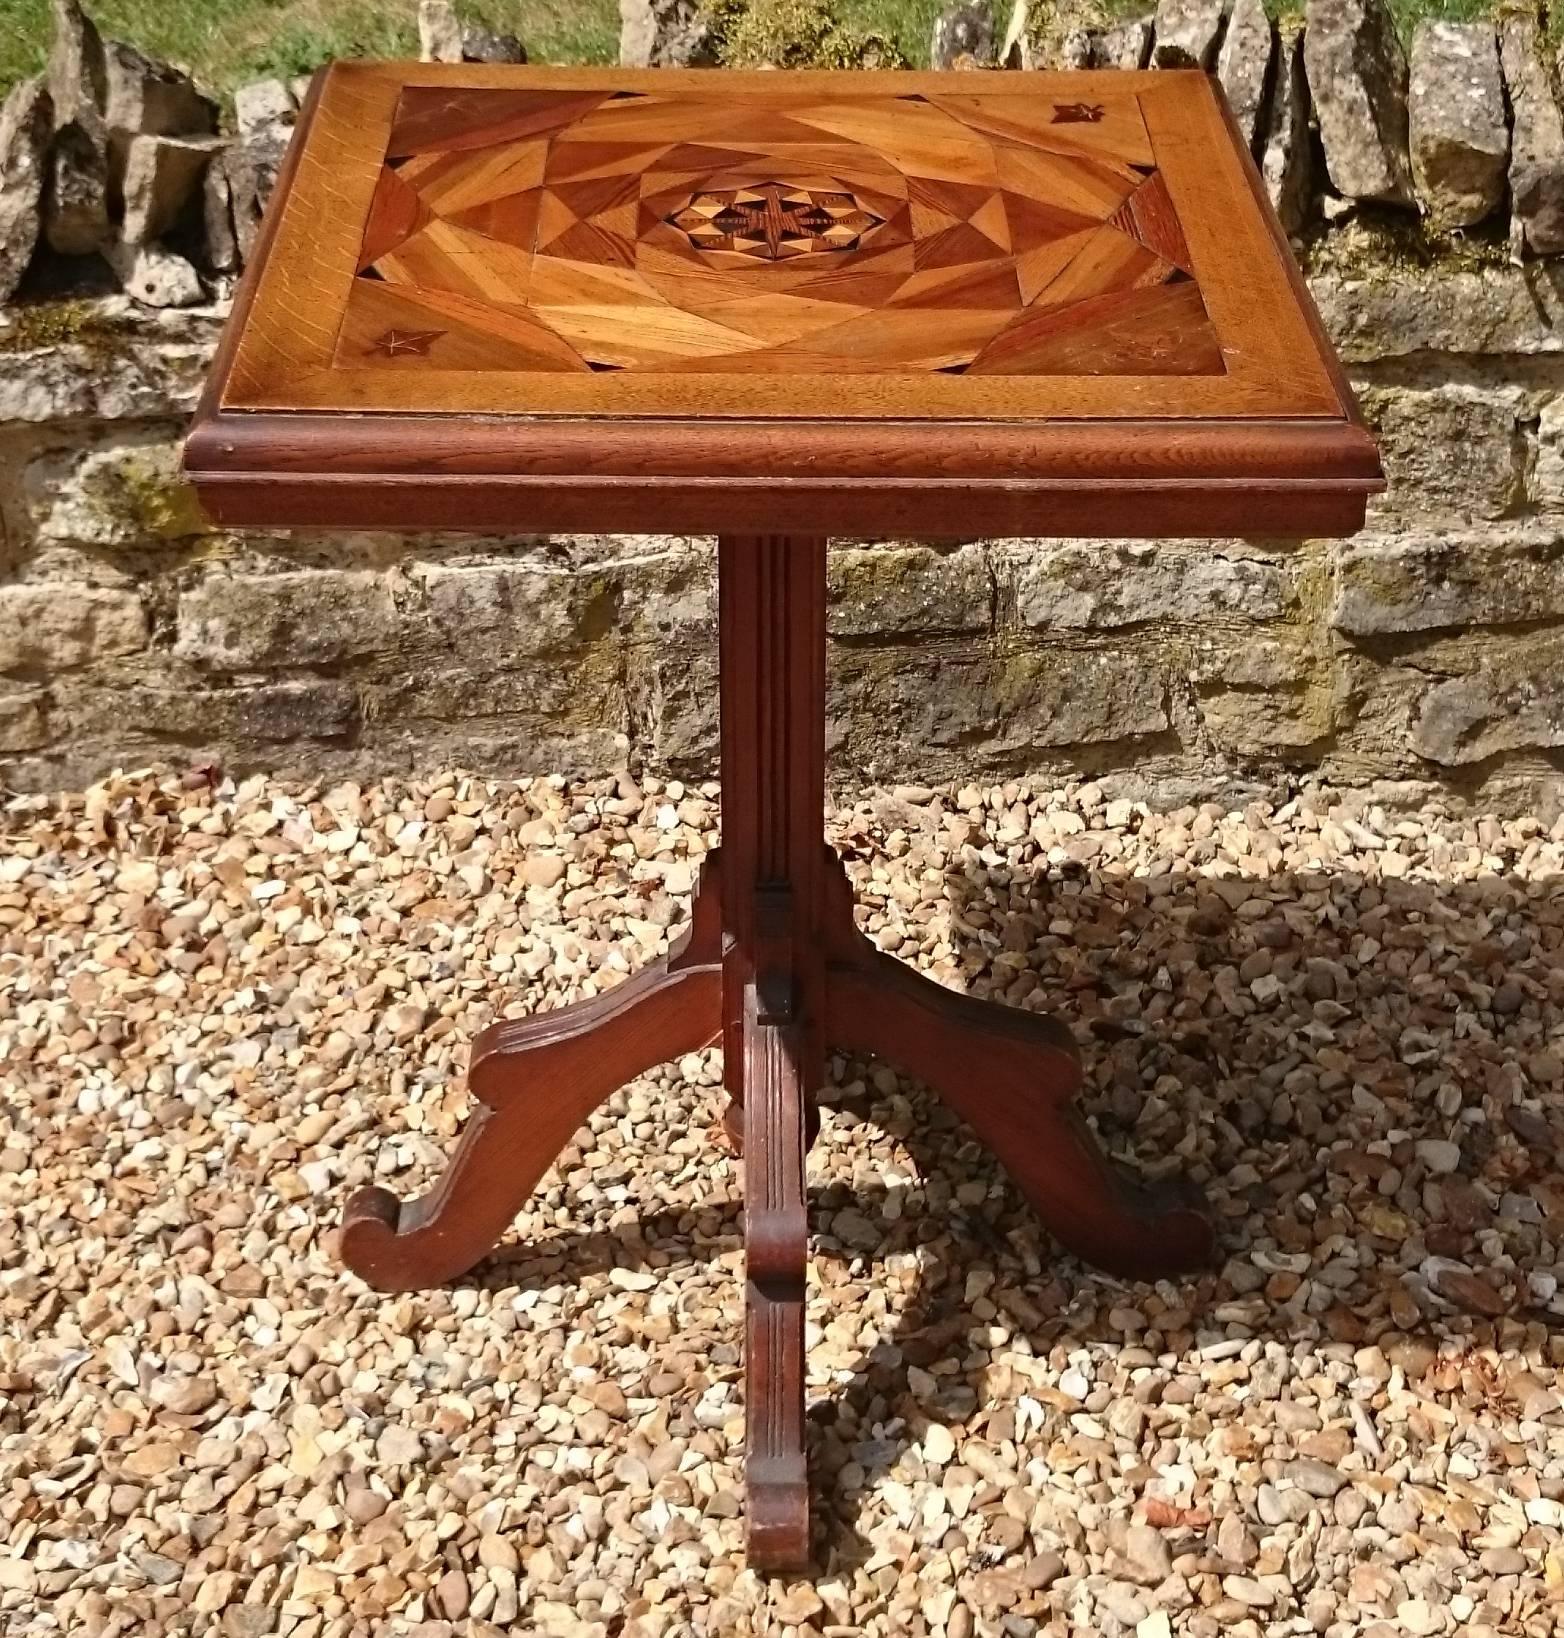 19th century antique wine table or lamp table with pine base and oak top. The pine is a good quality straight grained variety with no knots, the top is made of oak inlaid with several other timbers inlaid with marquetry in a series of concentric